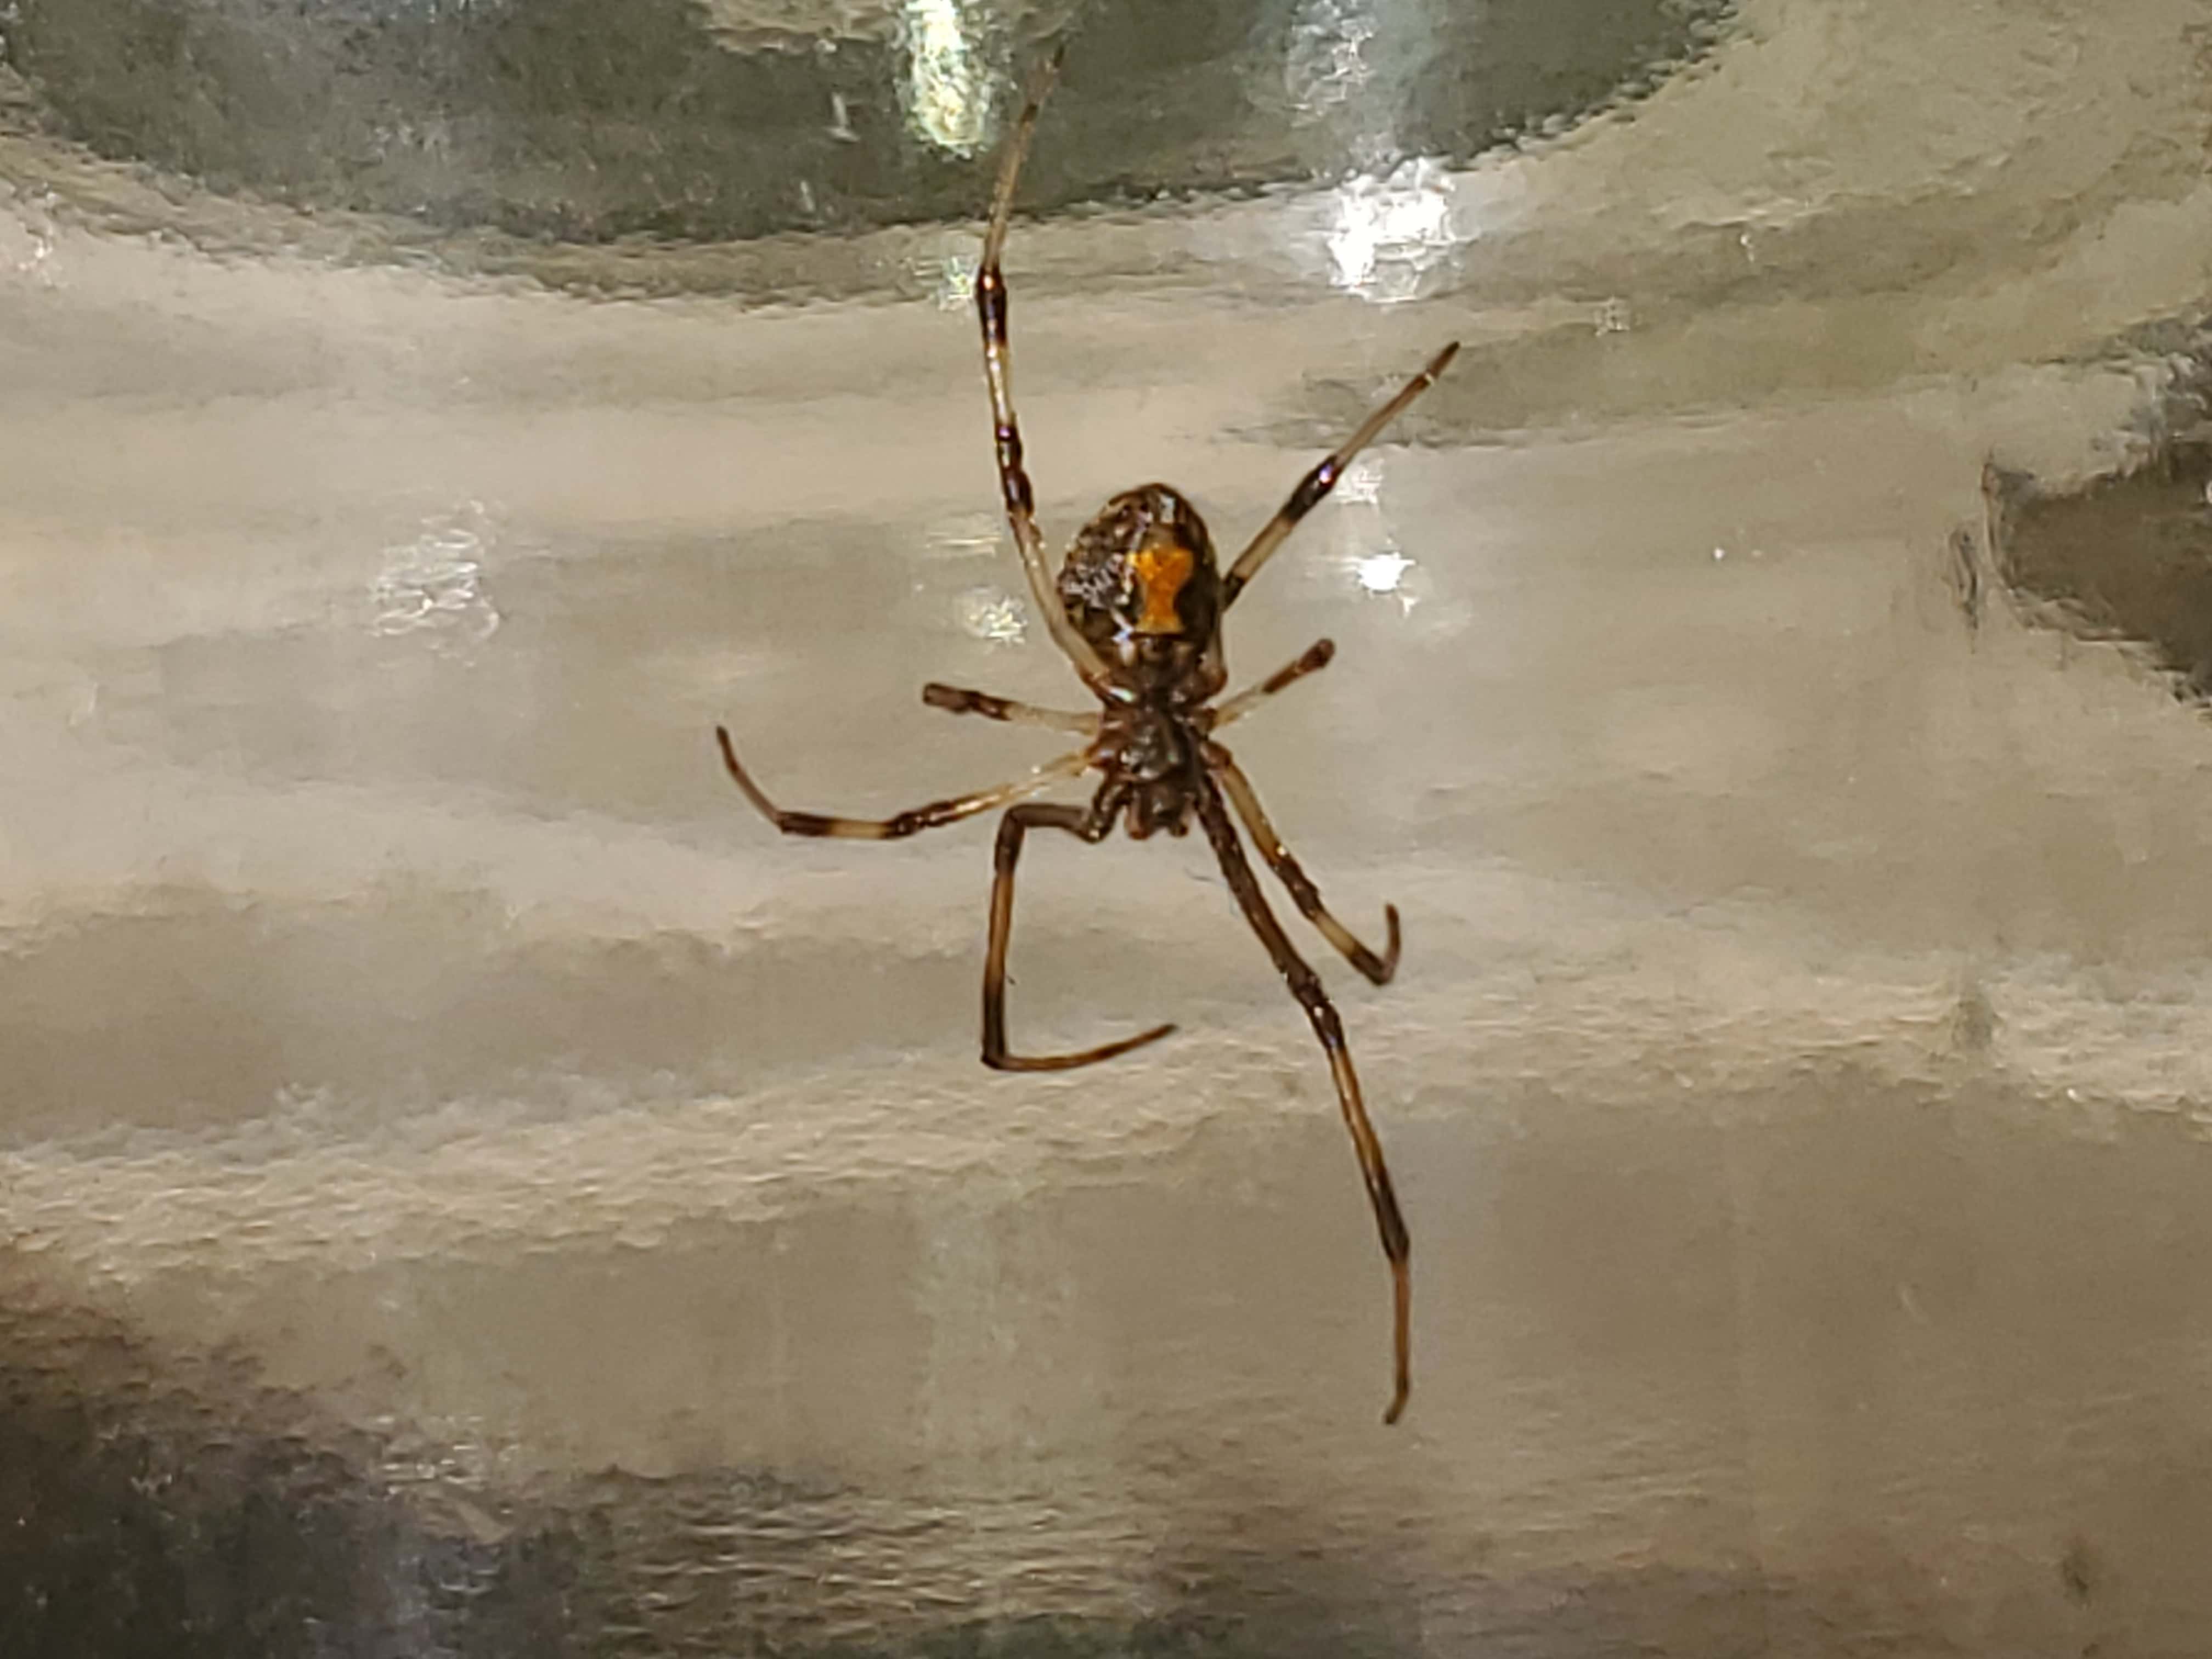 Picture of Latrodectus geometricus (Brown Widow Spider) - Ventral